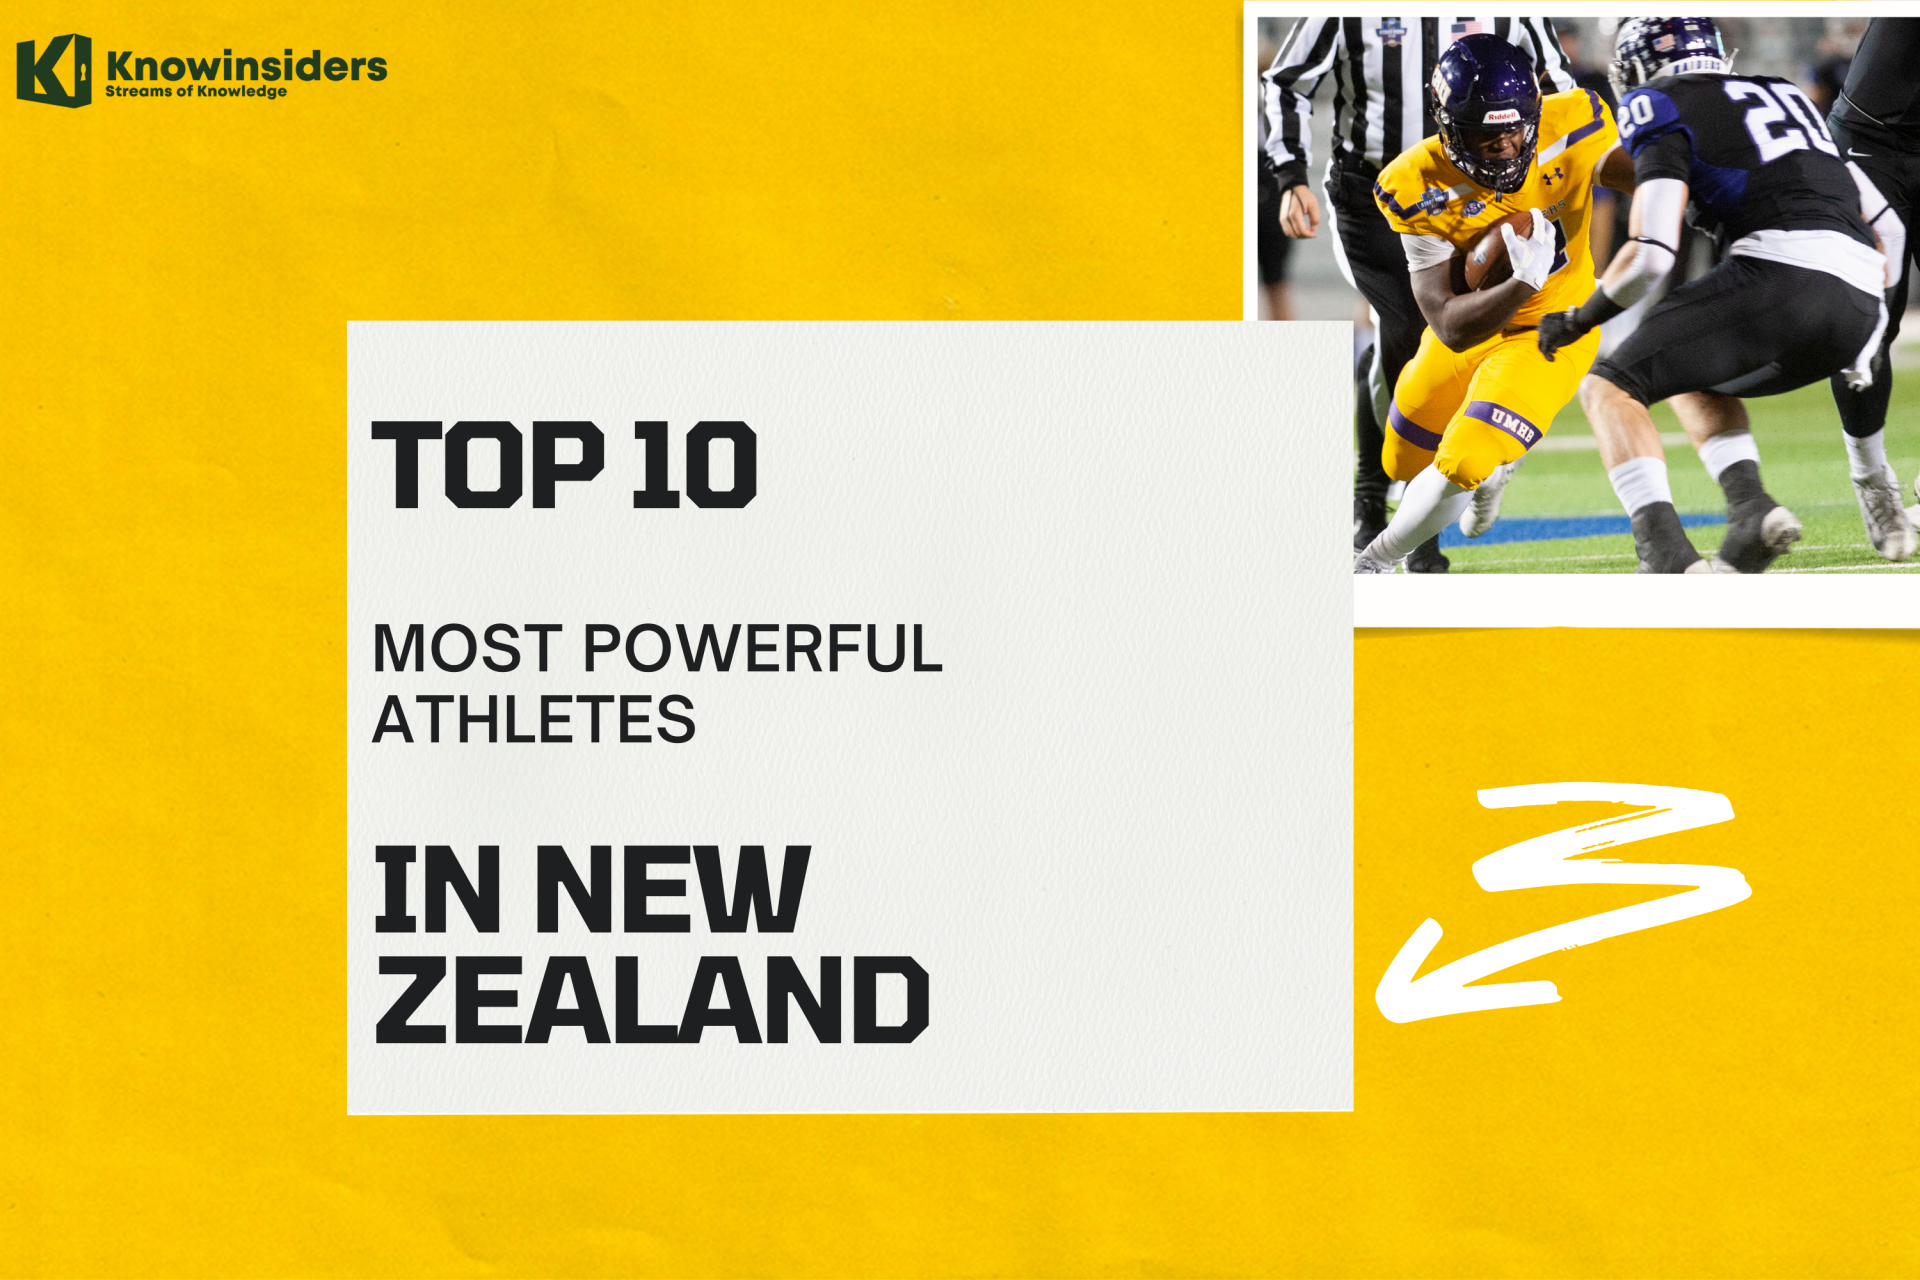 Top 10 Most Powerful Athletes In New Zealand